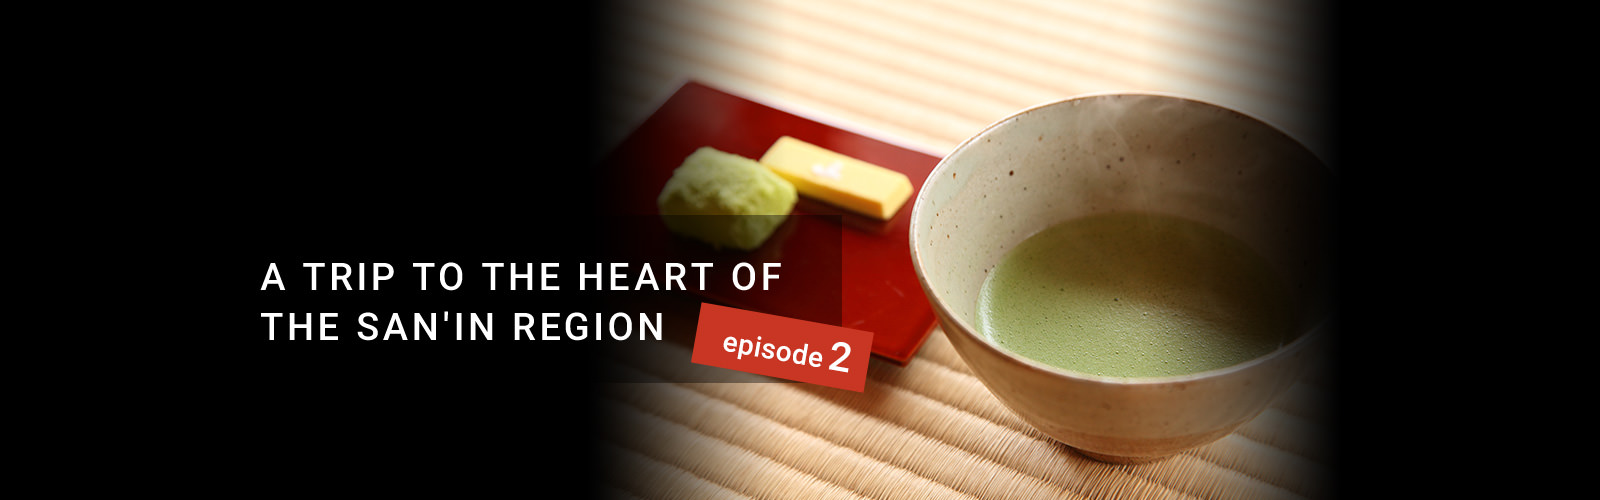 Story - Episode2 | A TRIP TO THE HEART OF THE SAN'IN REGION